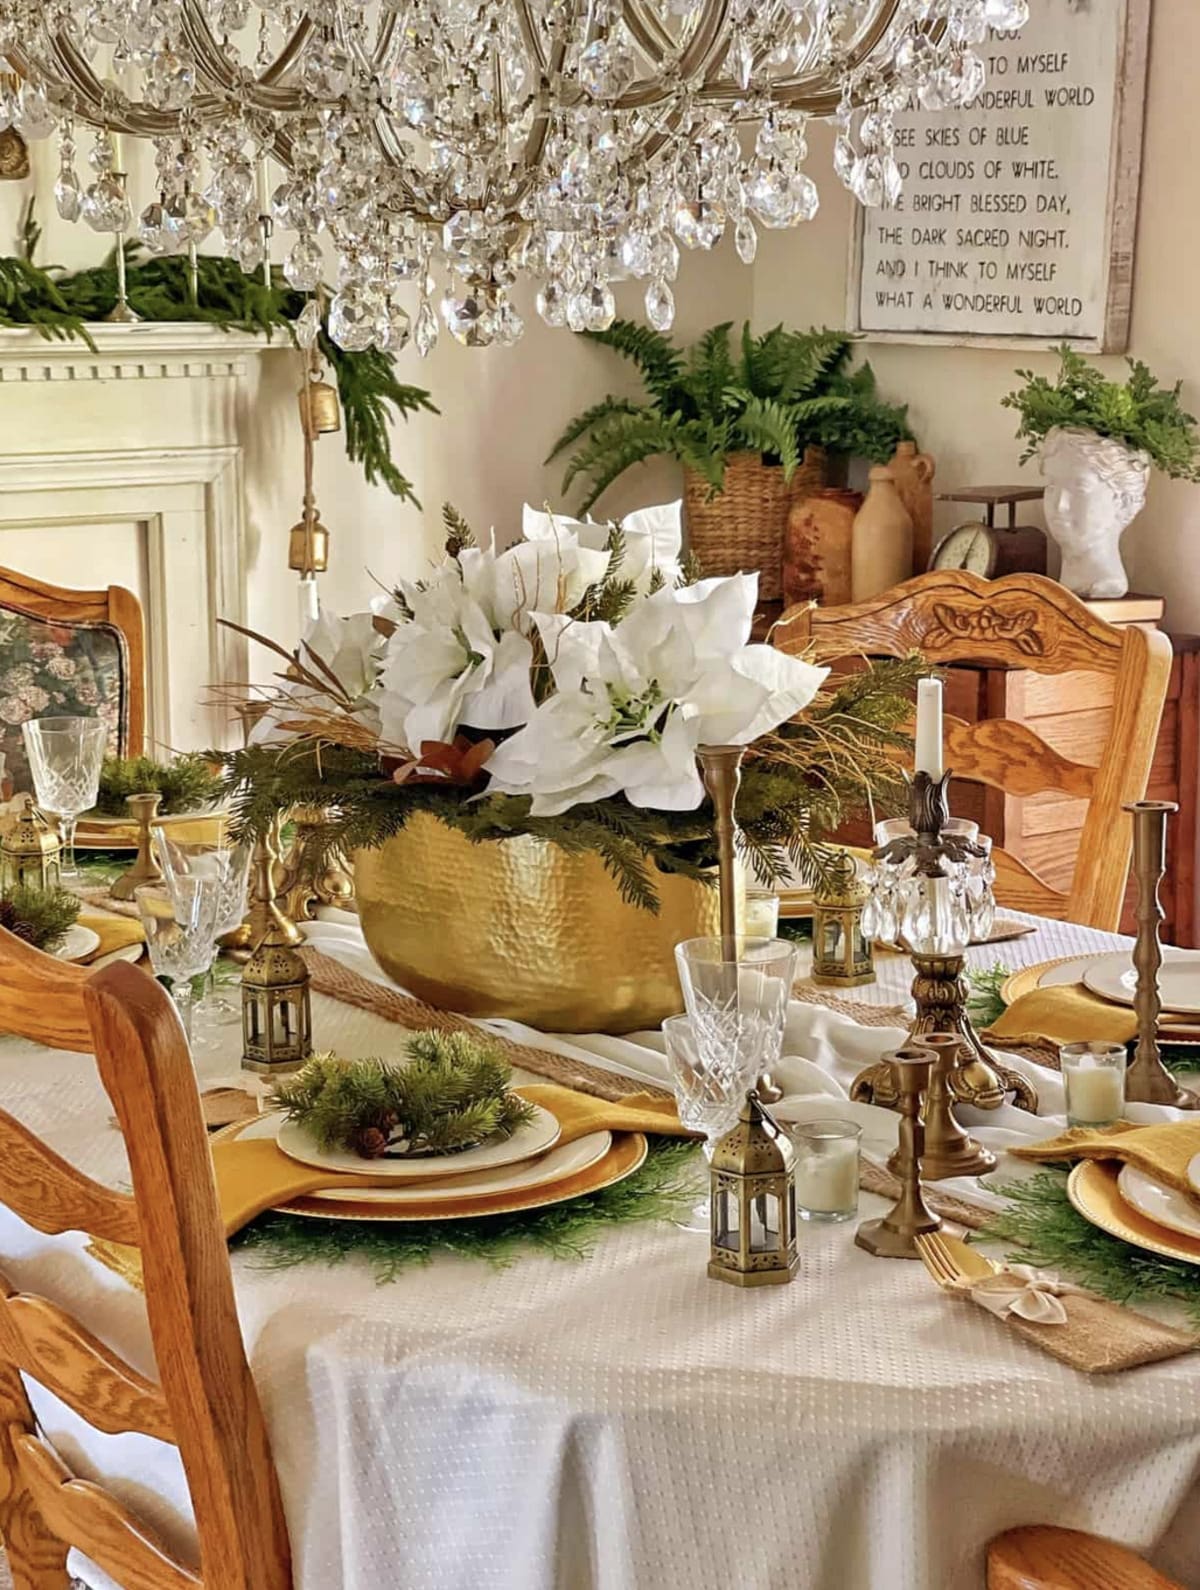 christmas table scape with an arrangement of Christmas greenery and flowers in a vintage gold vessel as a centerpiece